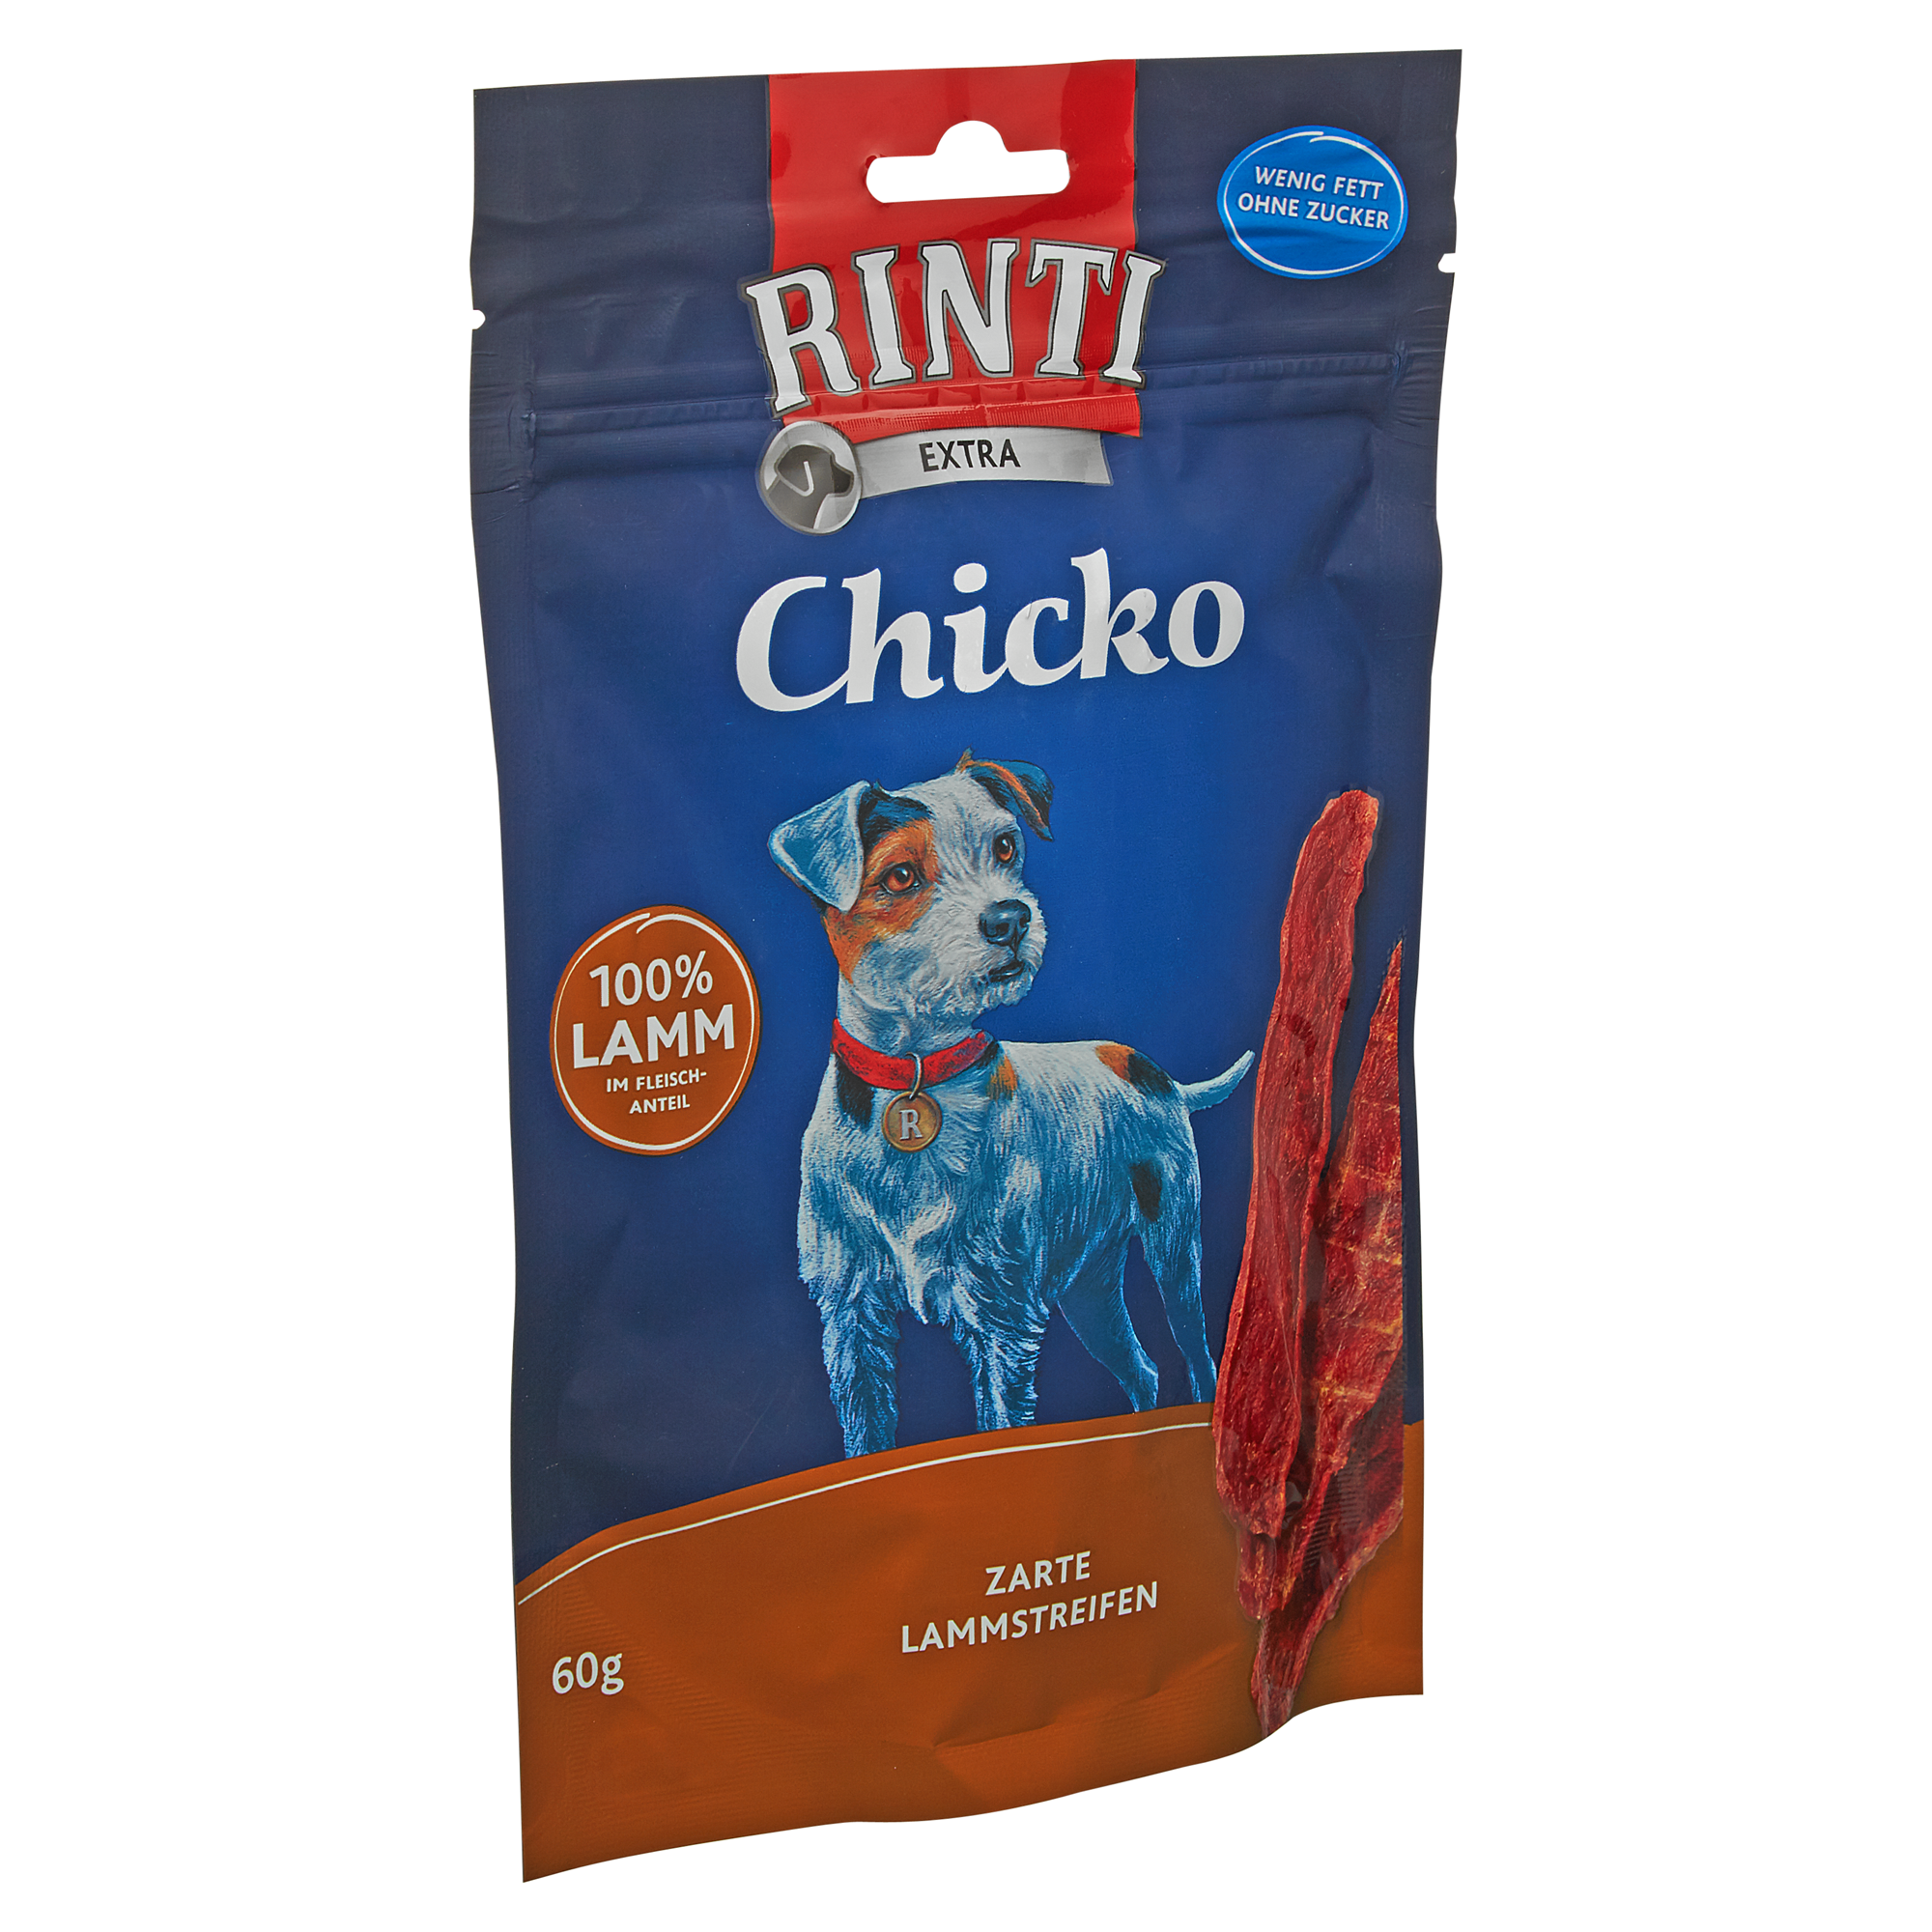 Hundesnack "Chicko" Extra mit Lammstreifen 60 g + product picture